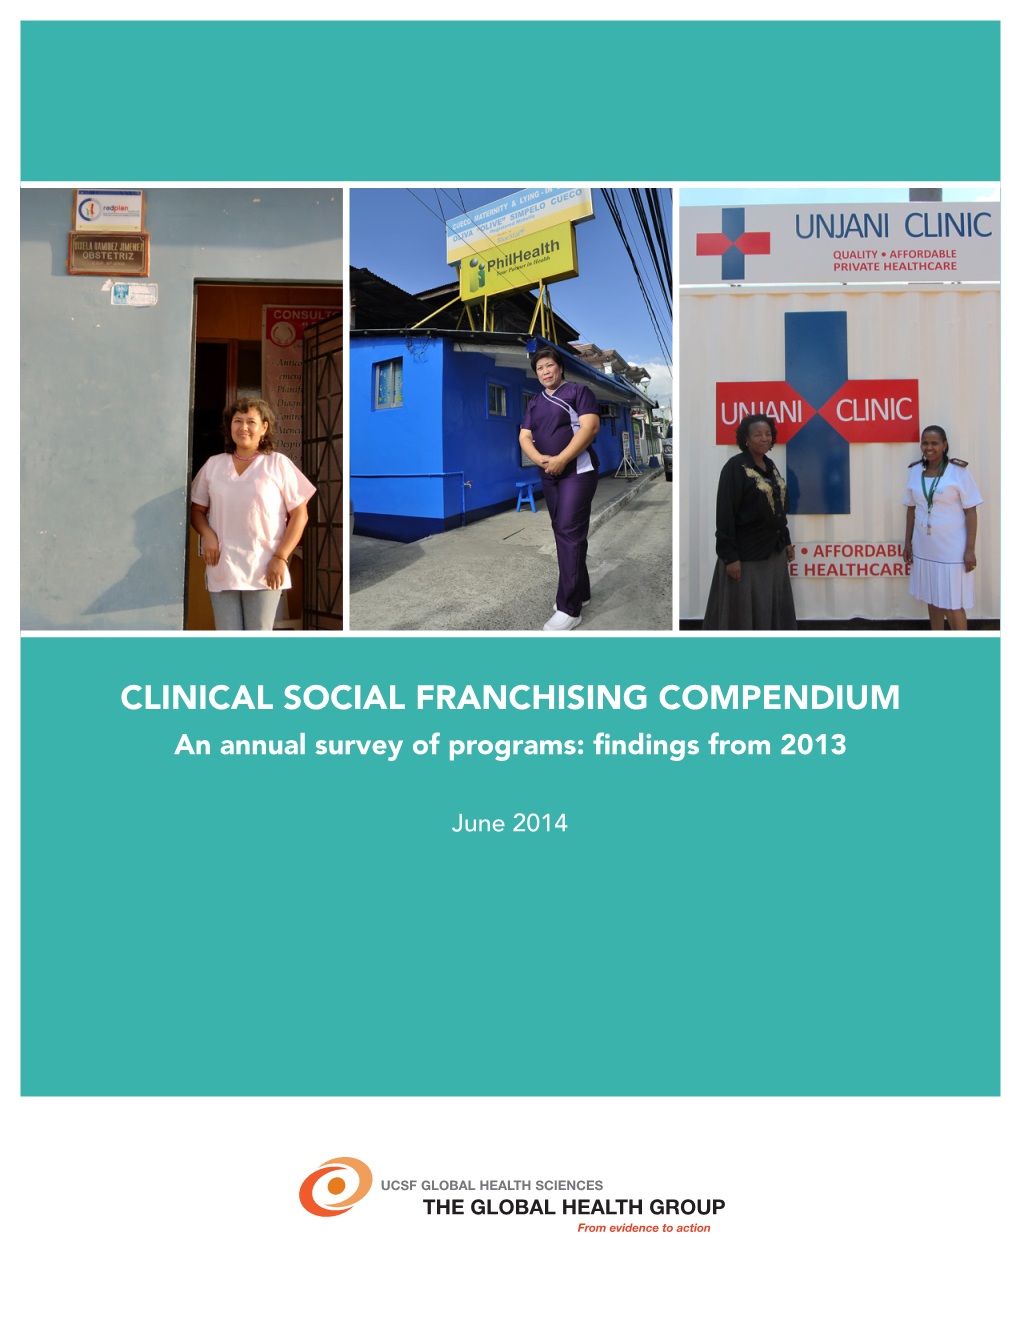 CLINICAL SOCIAL FRANCHISING COMPENDIUM an Annual Survey of Programs: Findings from 2013